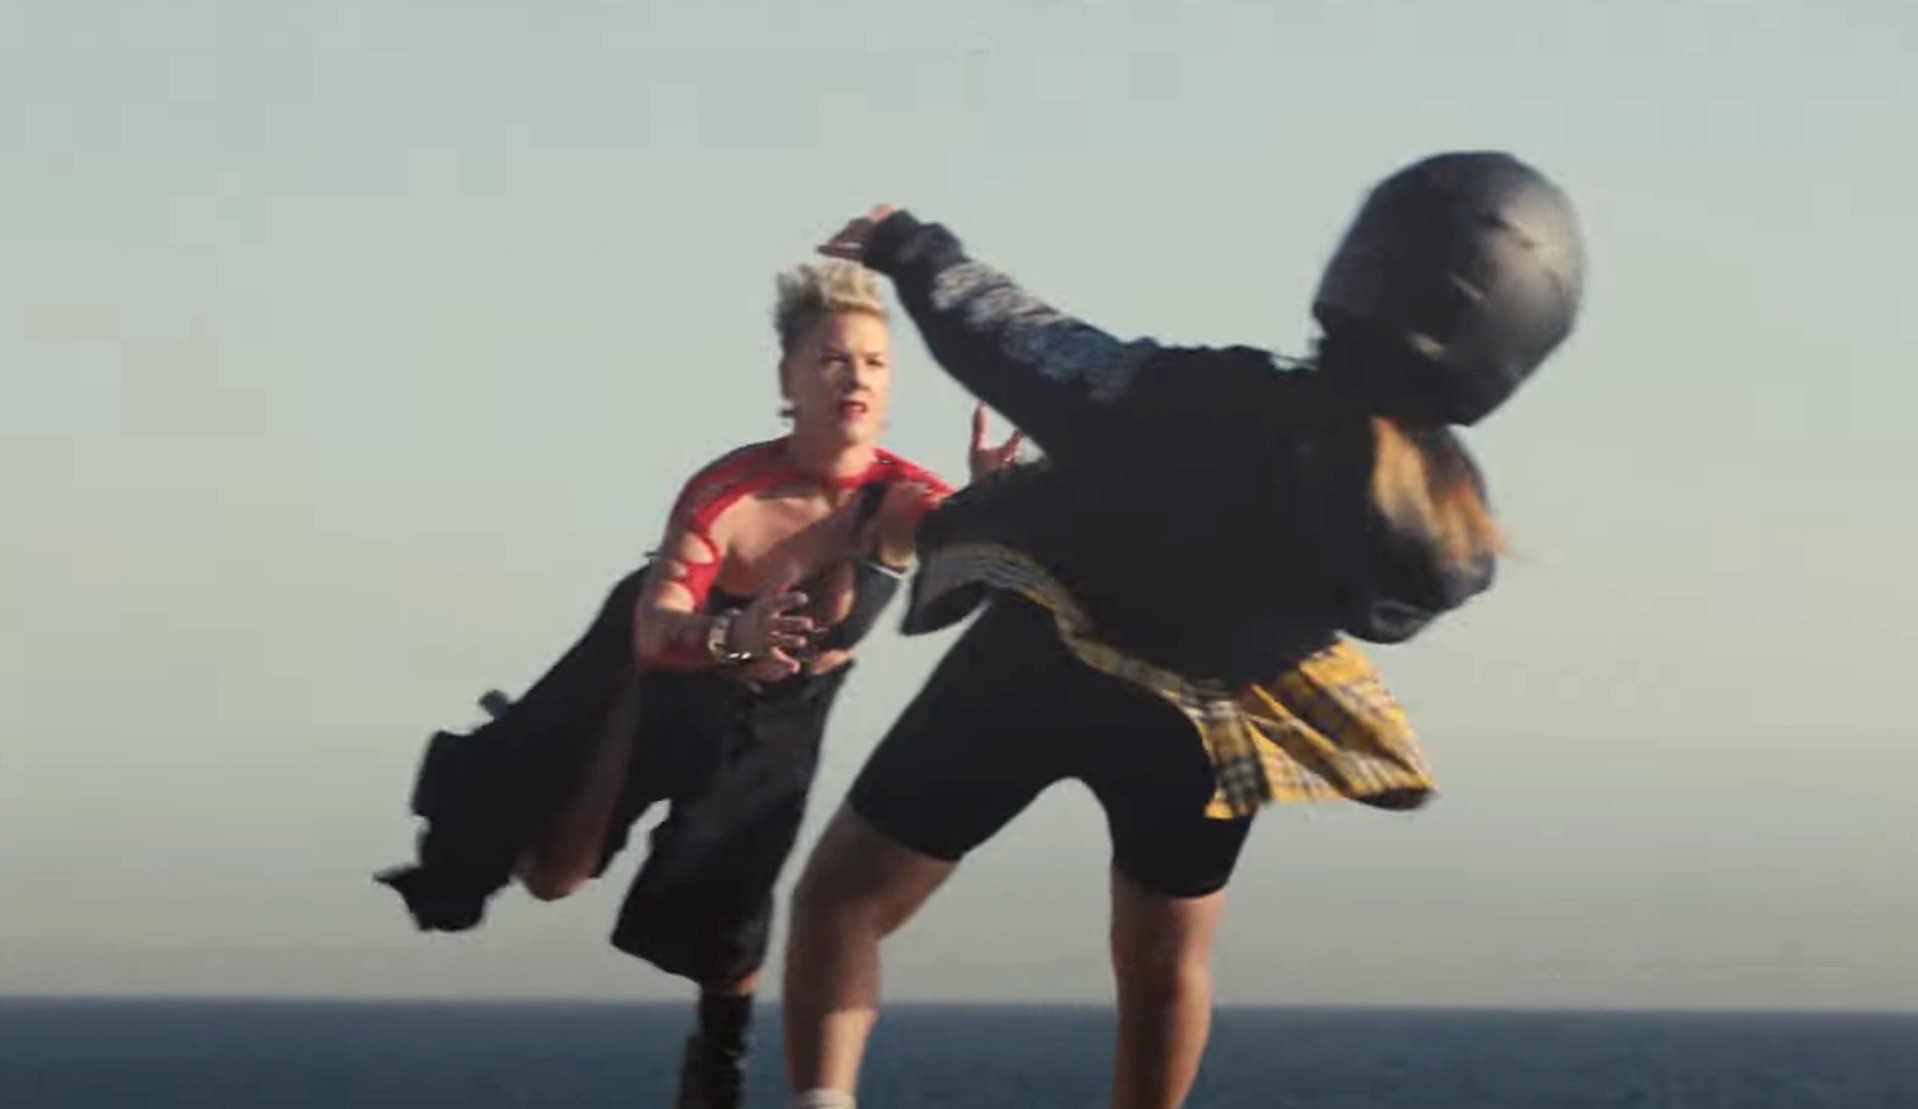 Pink’s ‘Trustfall’ Challenging For Top 10 Placement On UK Singles Chart